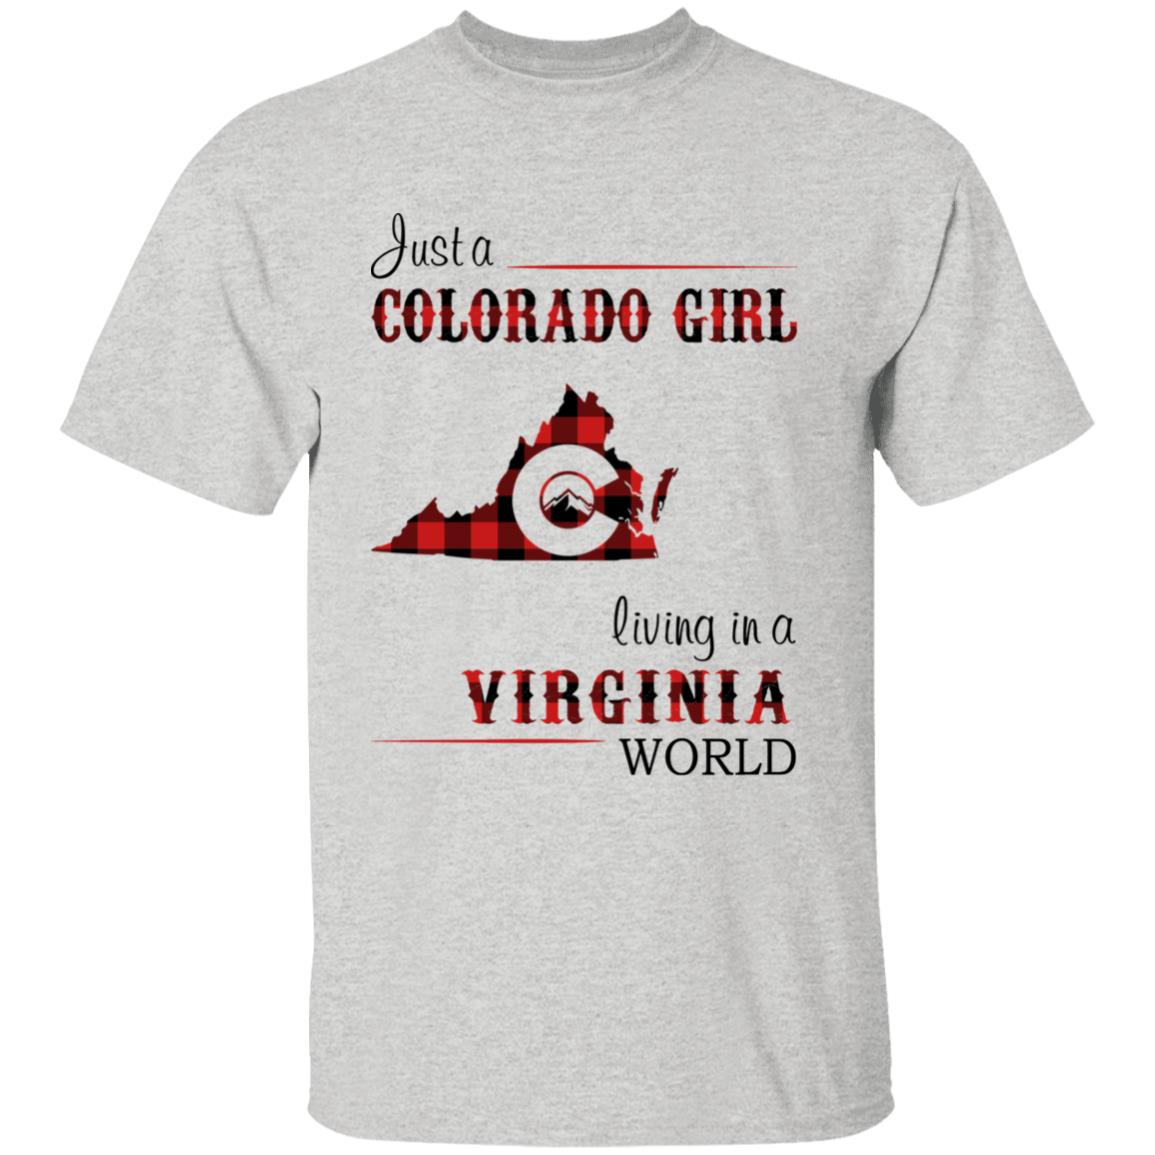 JJust A Colorado Girl in A Virginia World Unisex T-Shirt, Home State